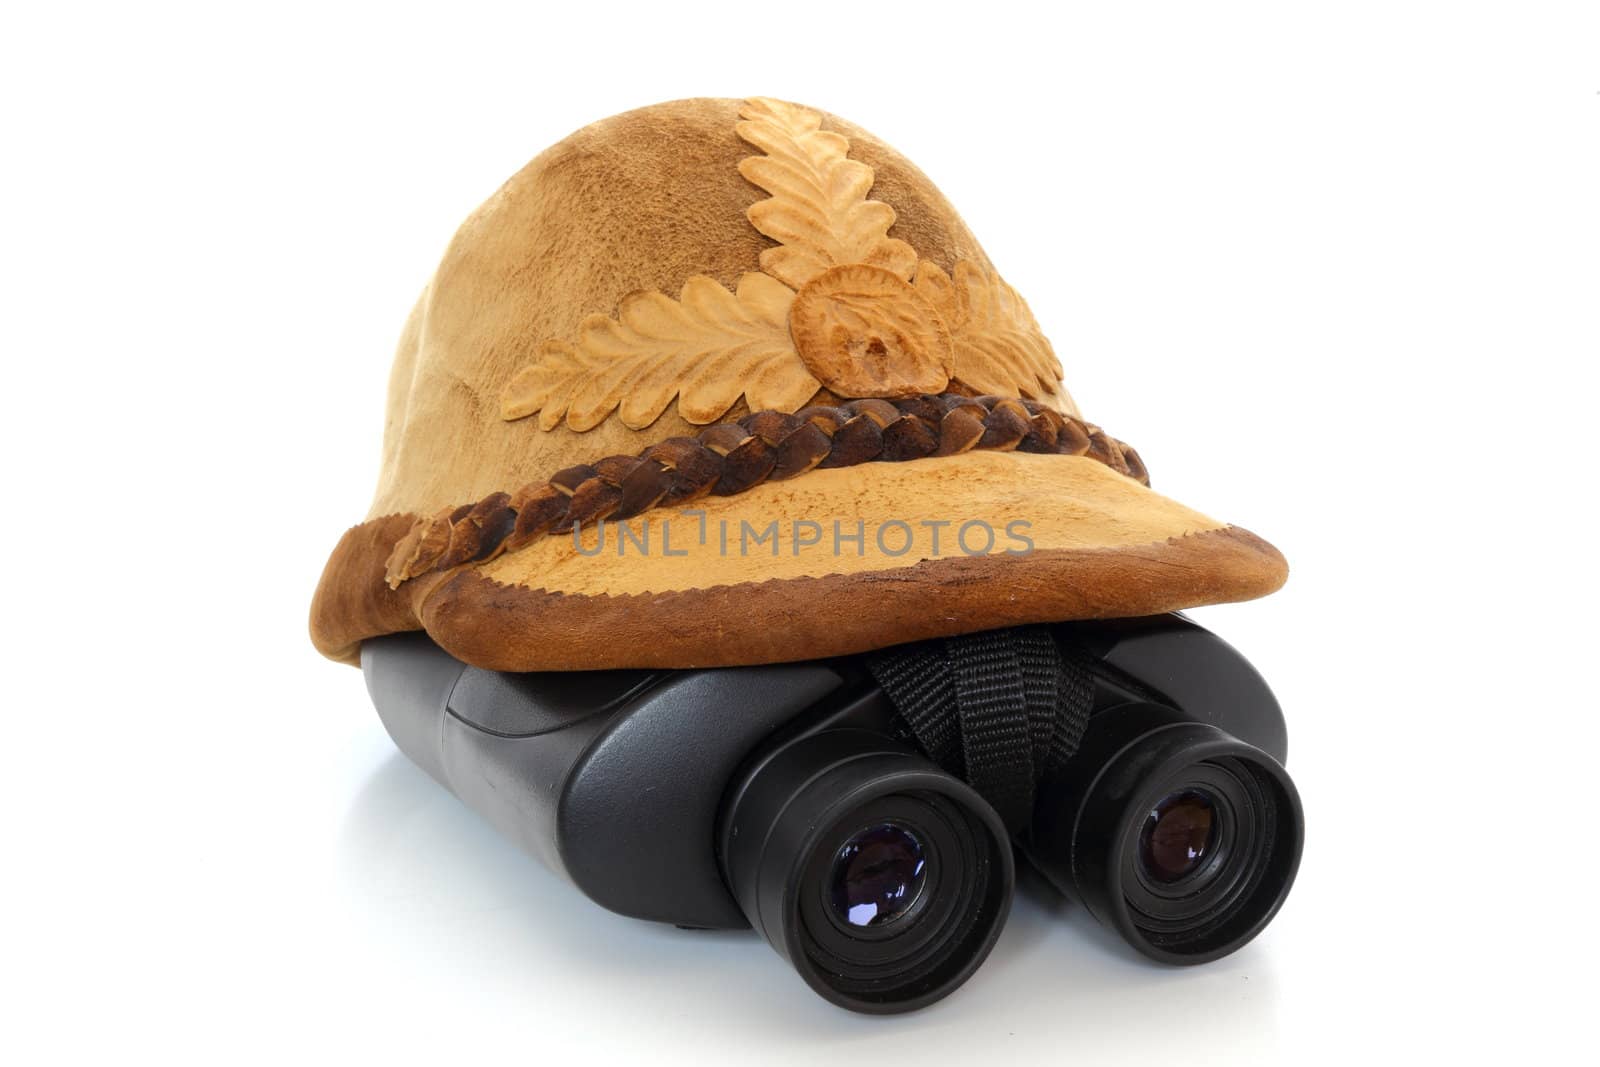 traditional hat and binoculars by taviphoto